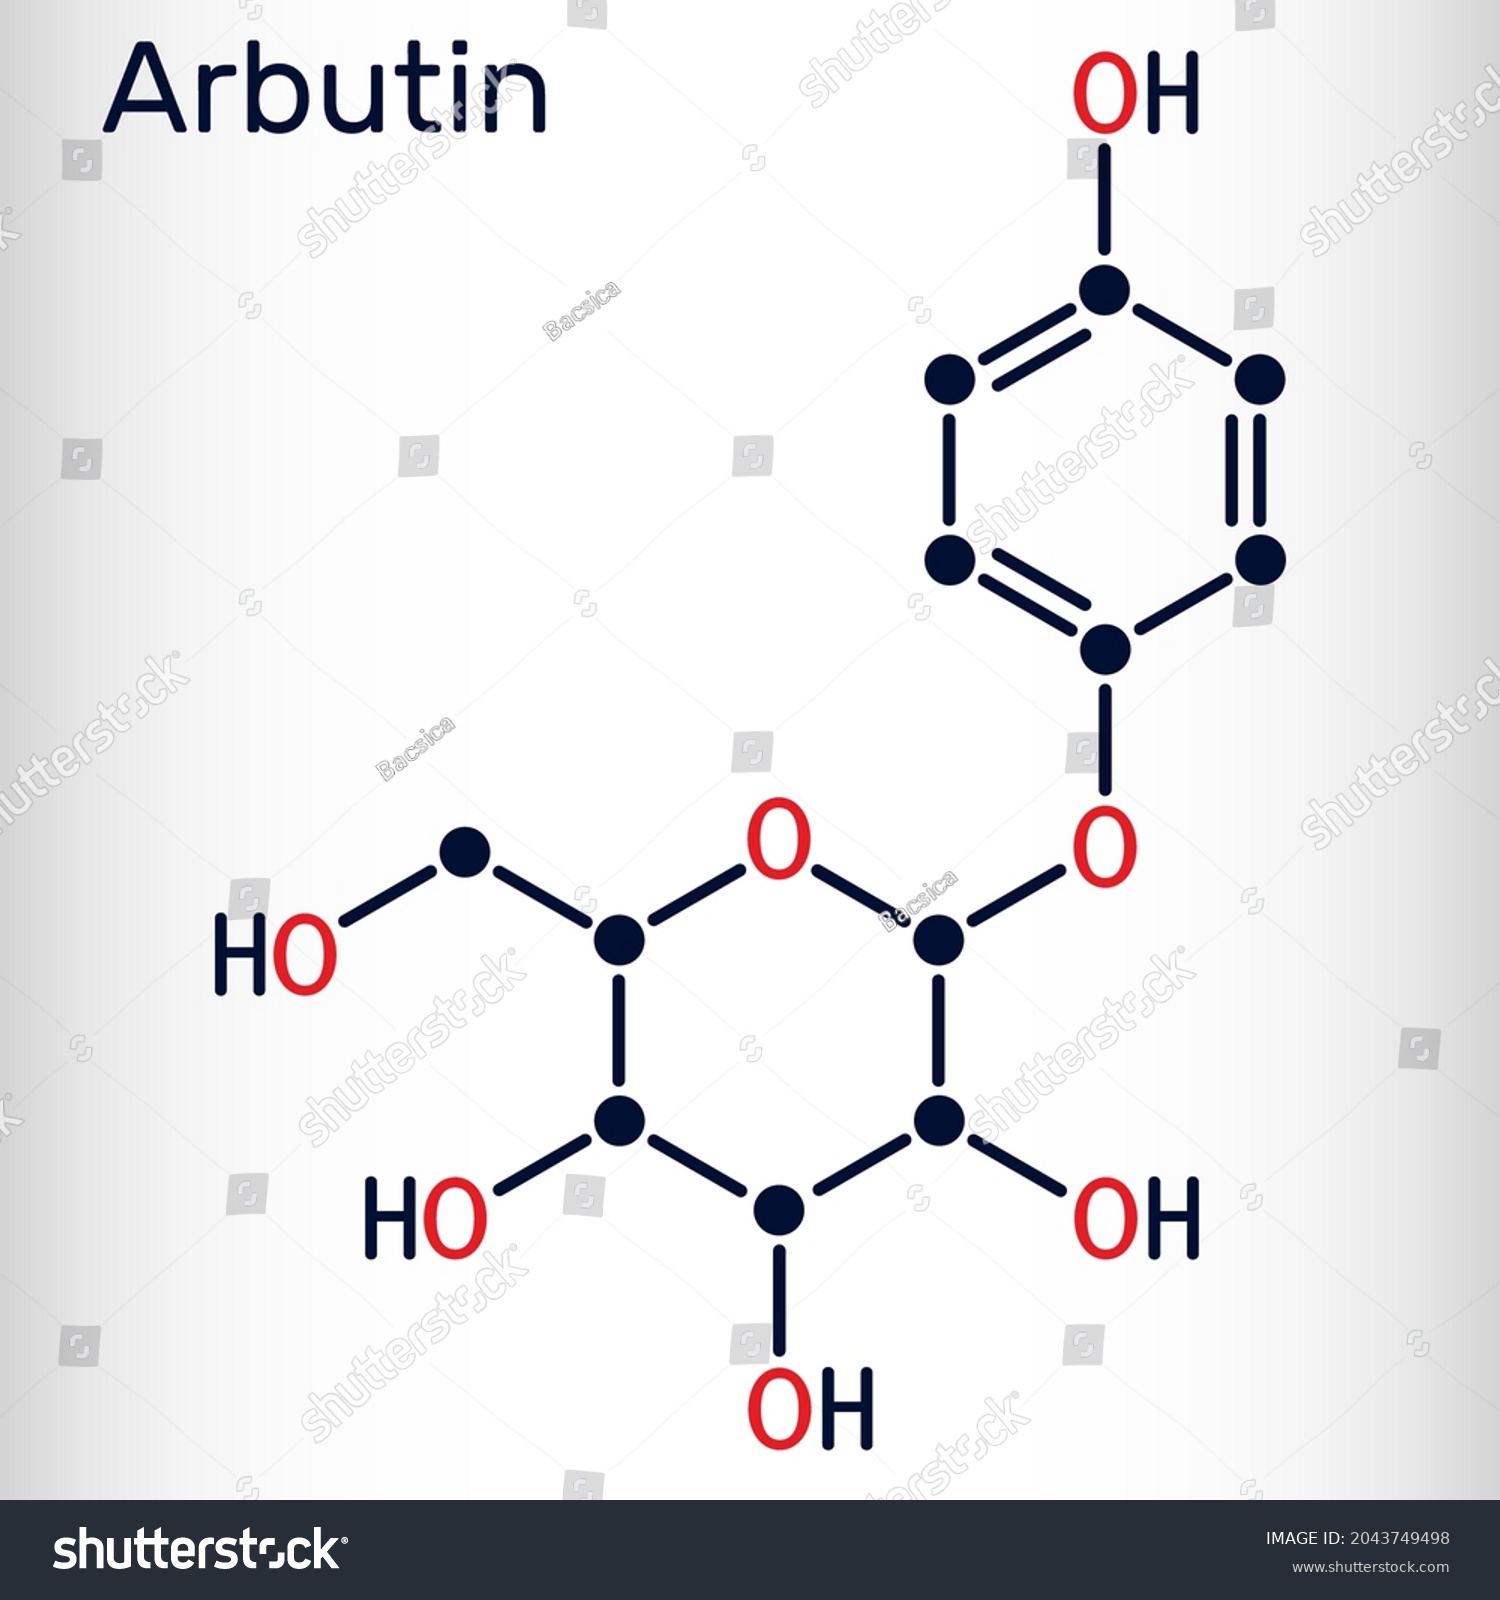 SVG of Arbutin, ursin, arbutoside, glycoside molecule. It is found in plants, preparations from them are used in medicine for diseases of bladder as antiseptic. Skeletal chemical formula. Vector illustration svg